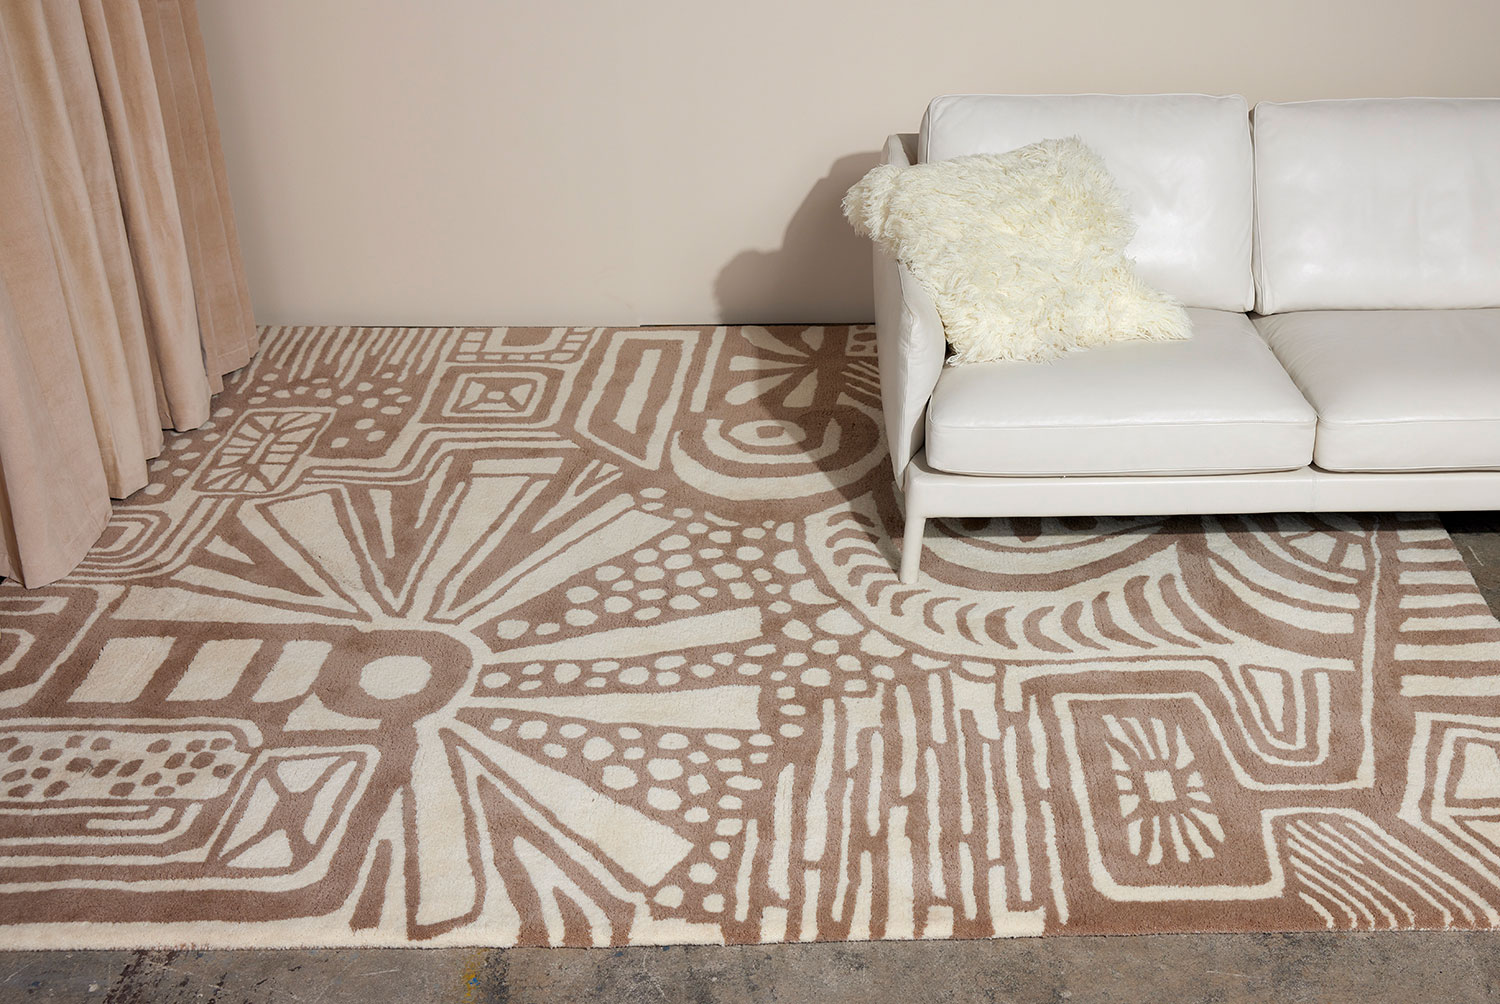 A white leather couch sits on a neutral colored, modern area rug called Storybook by Angela Adams